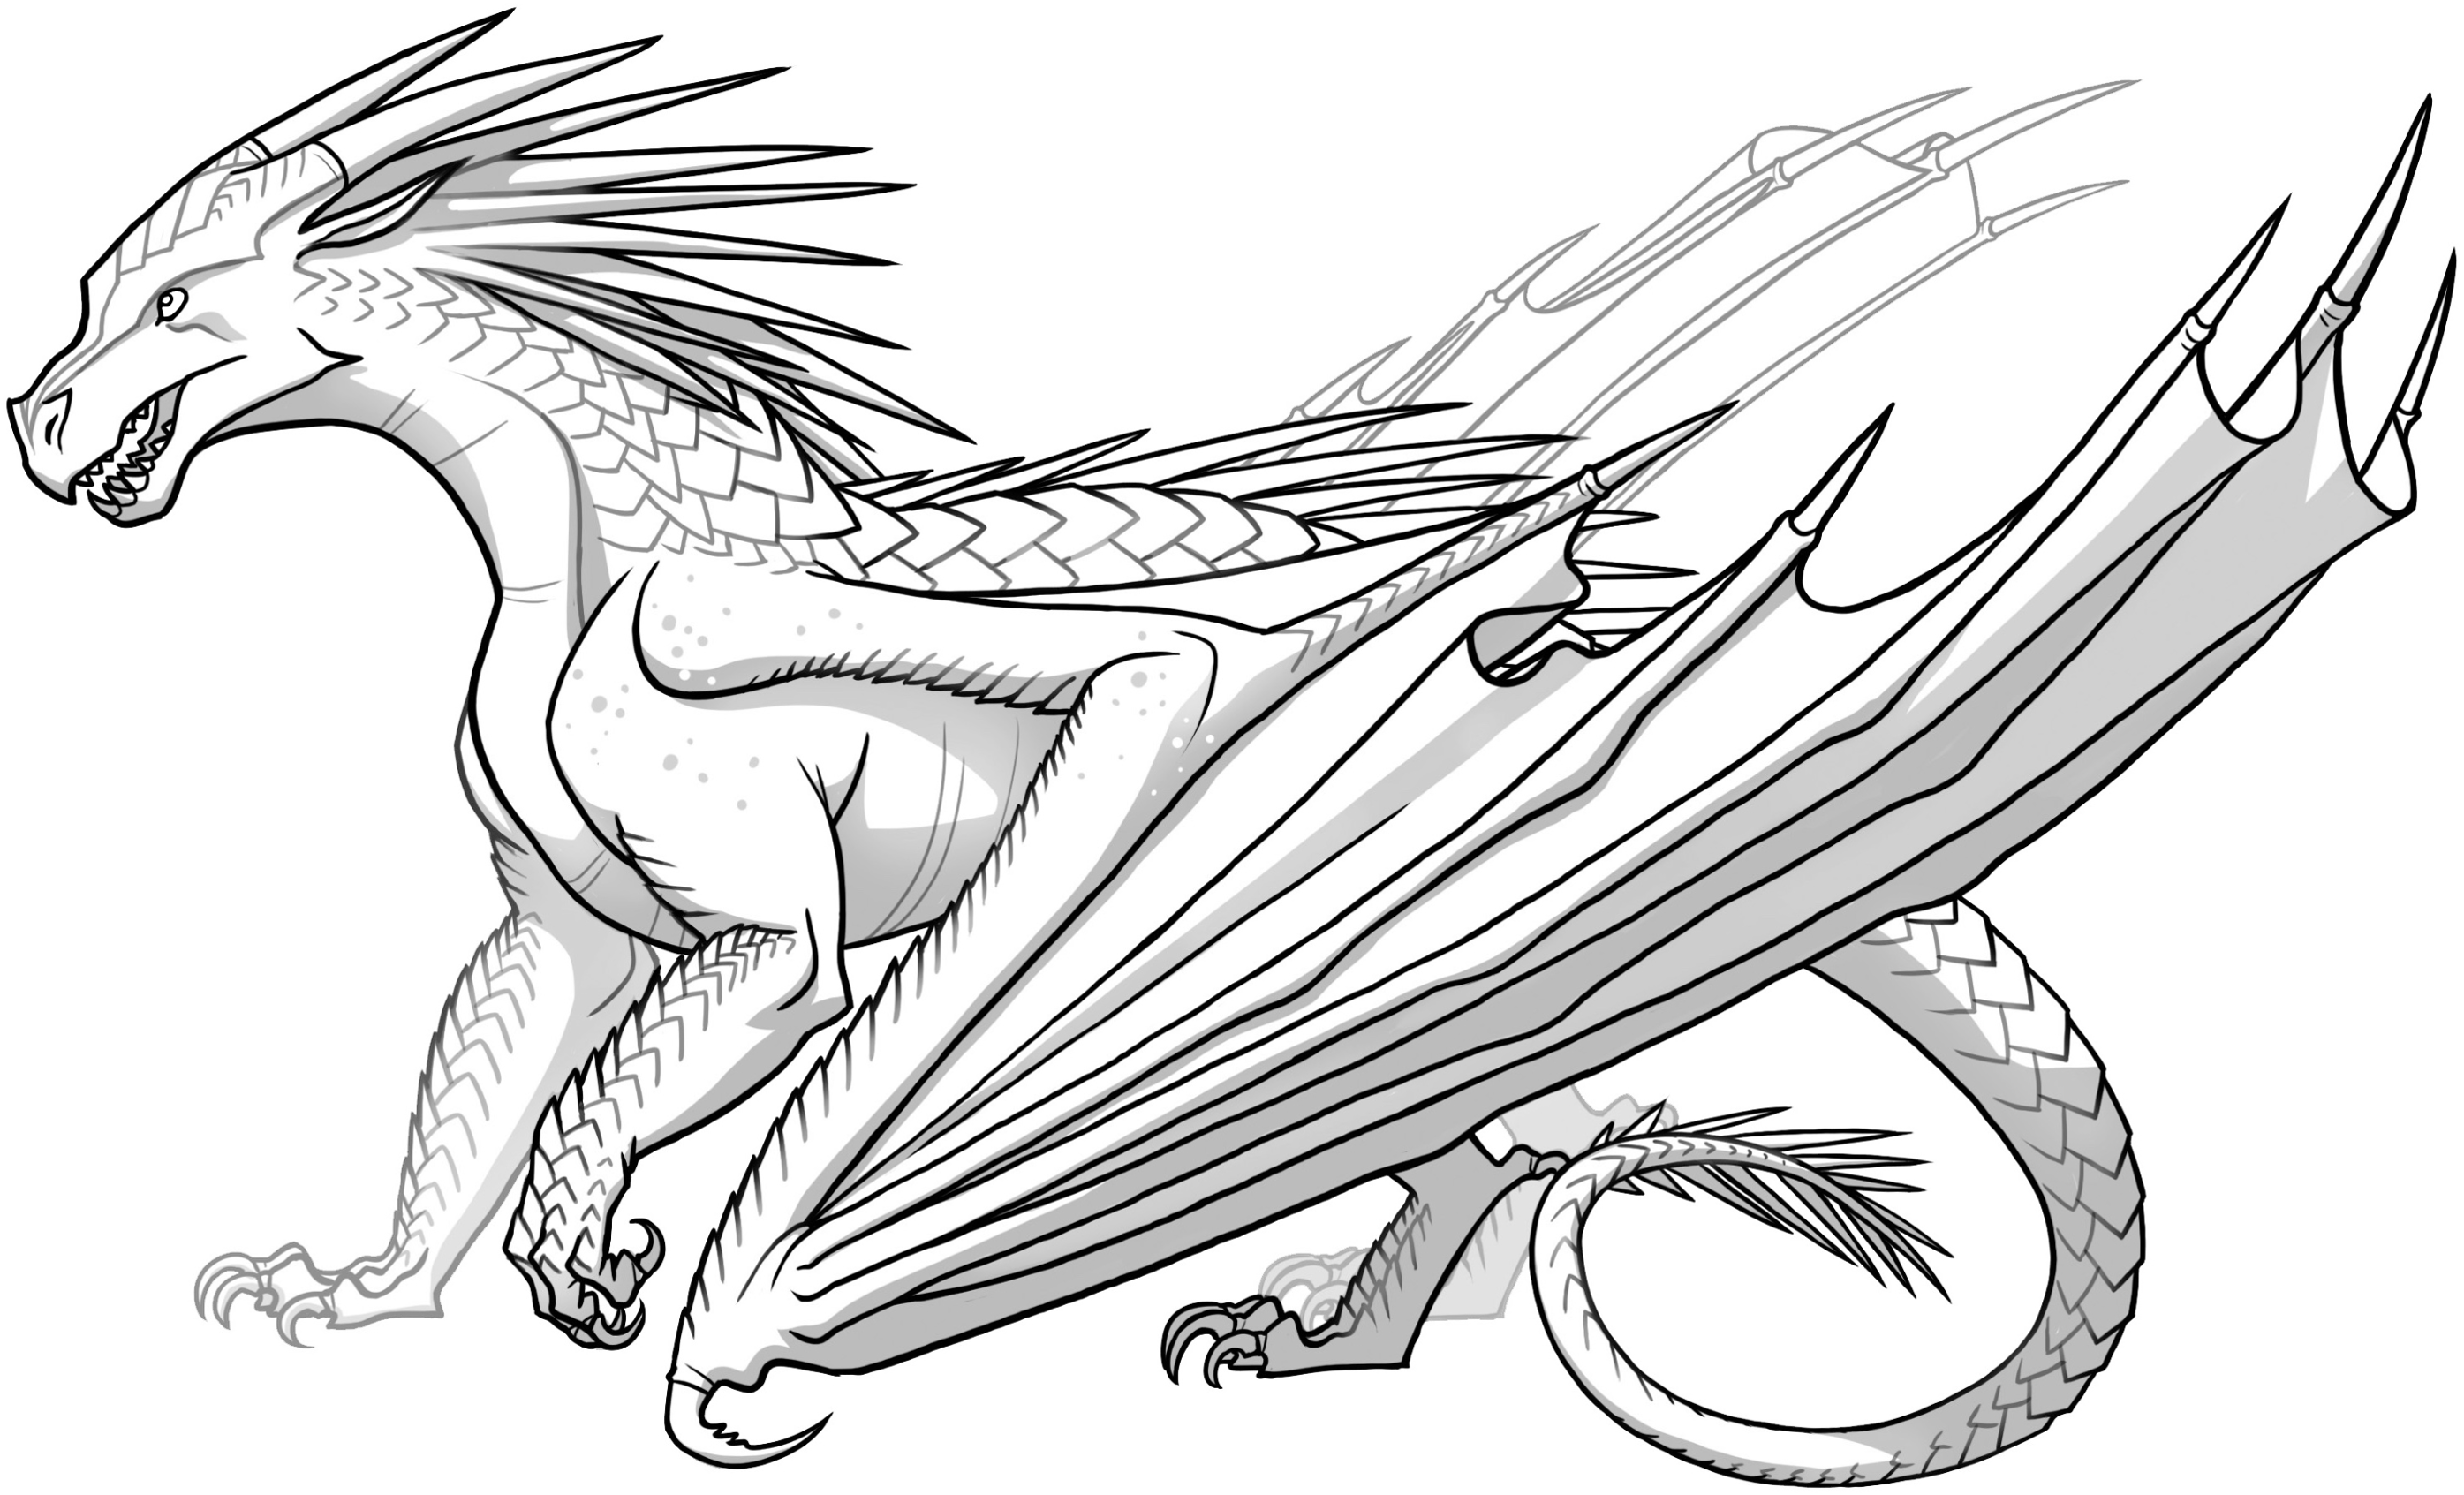 Fire dragon graphic black and white sketch Vector Image